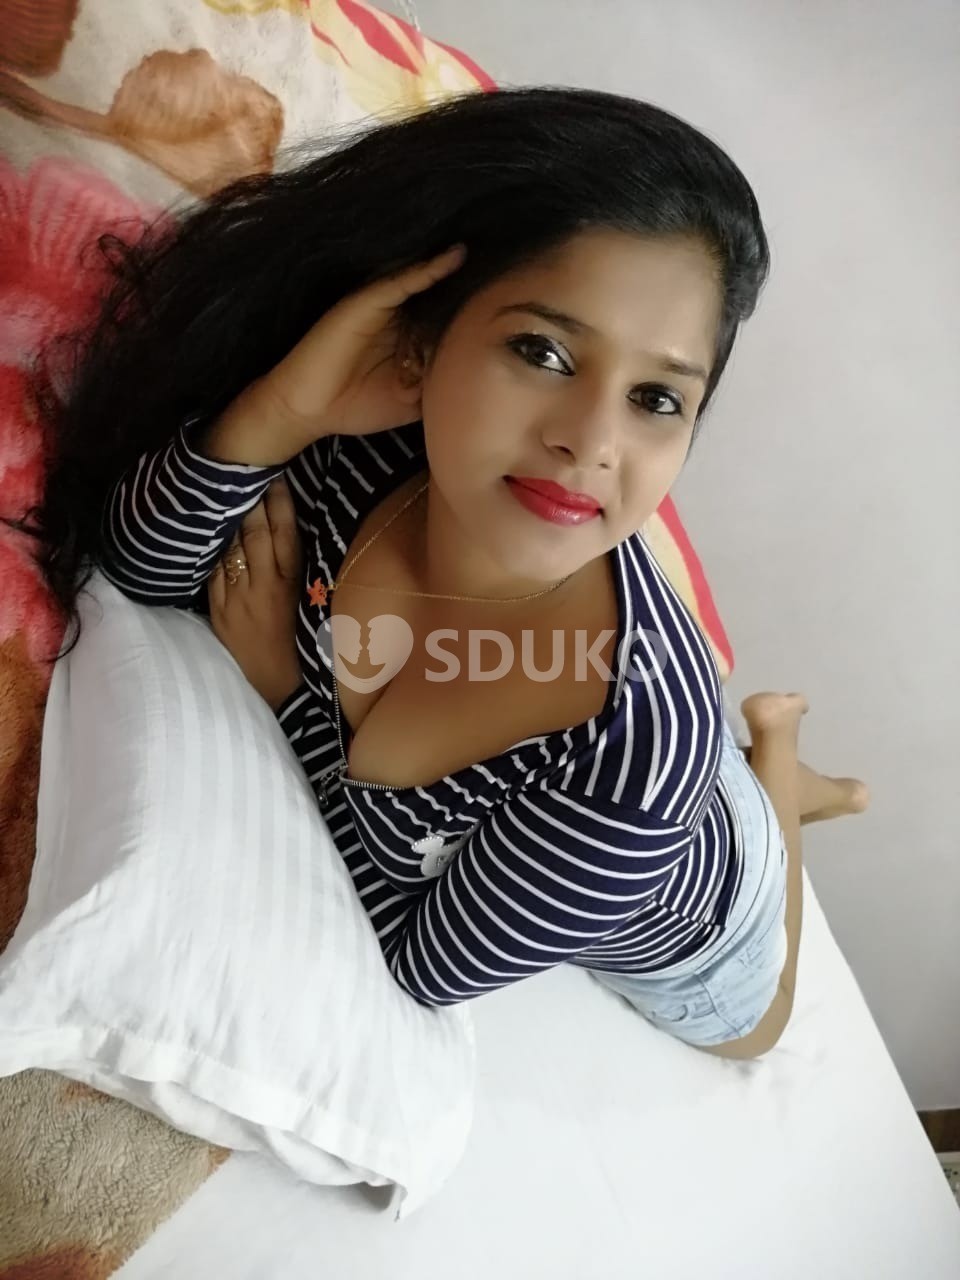 Anna Nagar BEST 24×7 AFFORDABLE CALL GIRL SERVICE FOR SEX AND SETISFACATION CALL ME FOR ENJOy.....